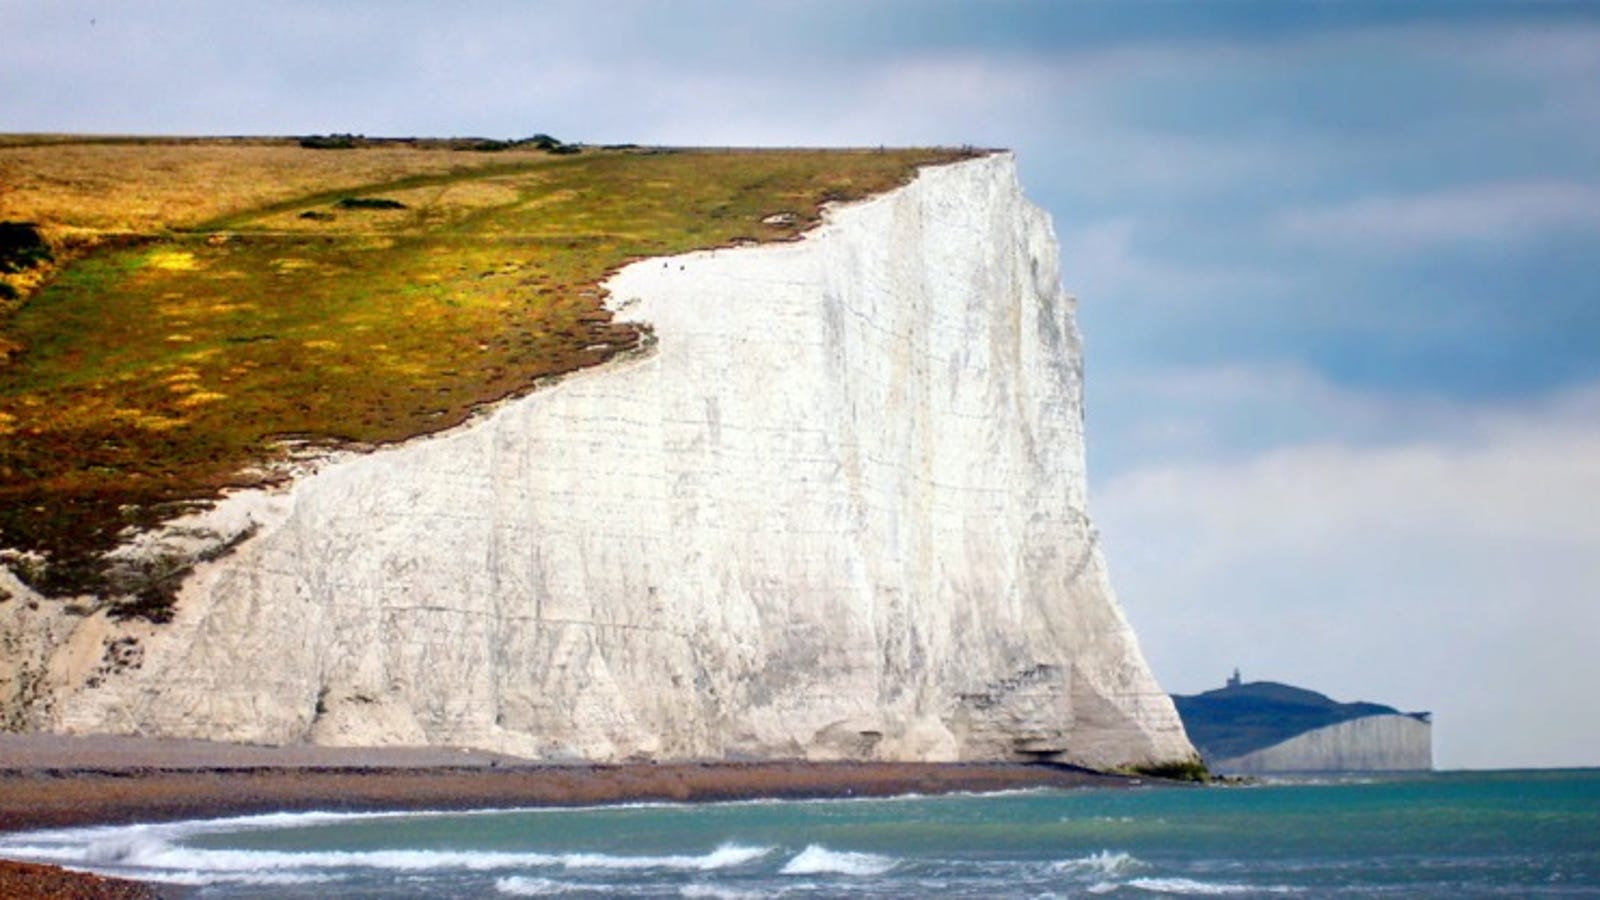 How Tiny Algae Helped Form the Famous White Cliffs of Dover